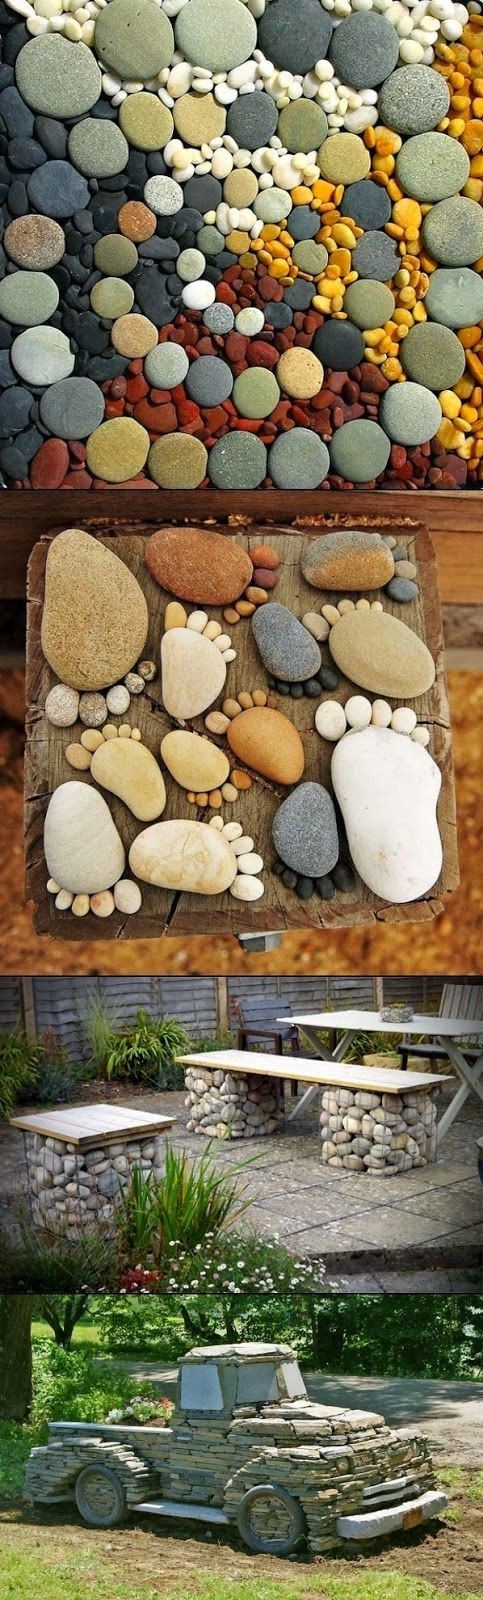 I might have to make a table out of these stones!...